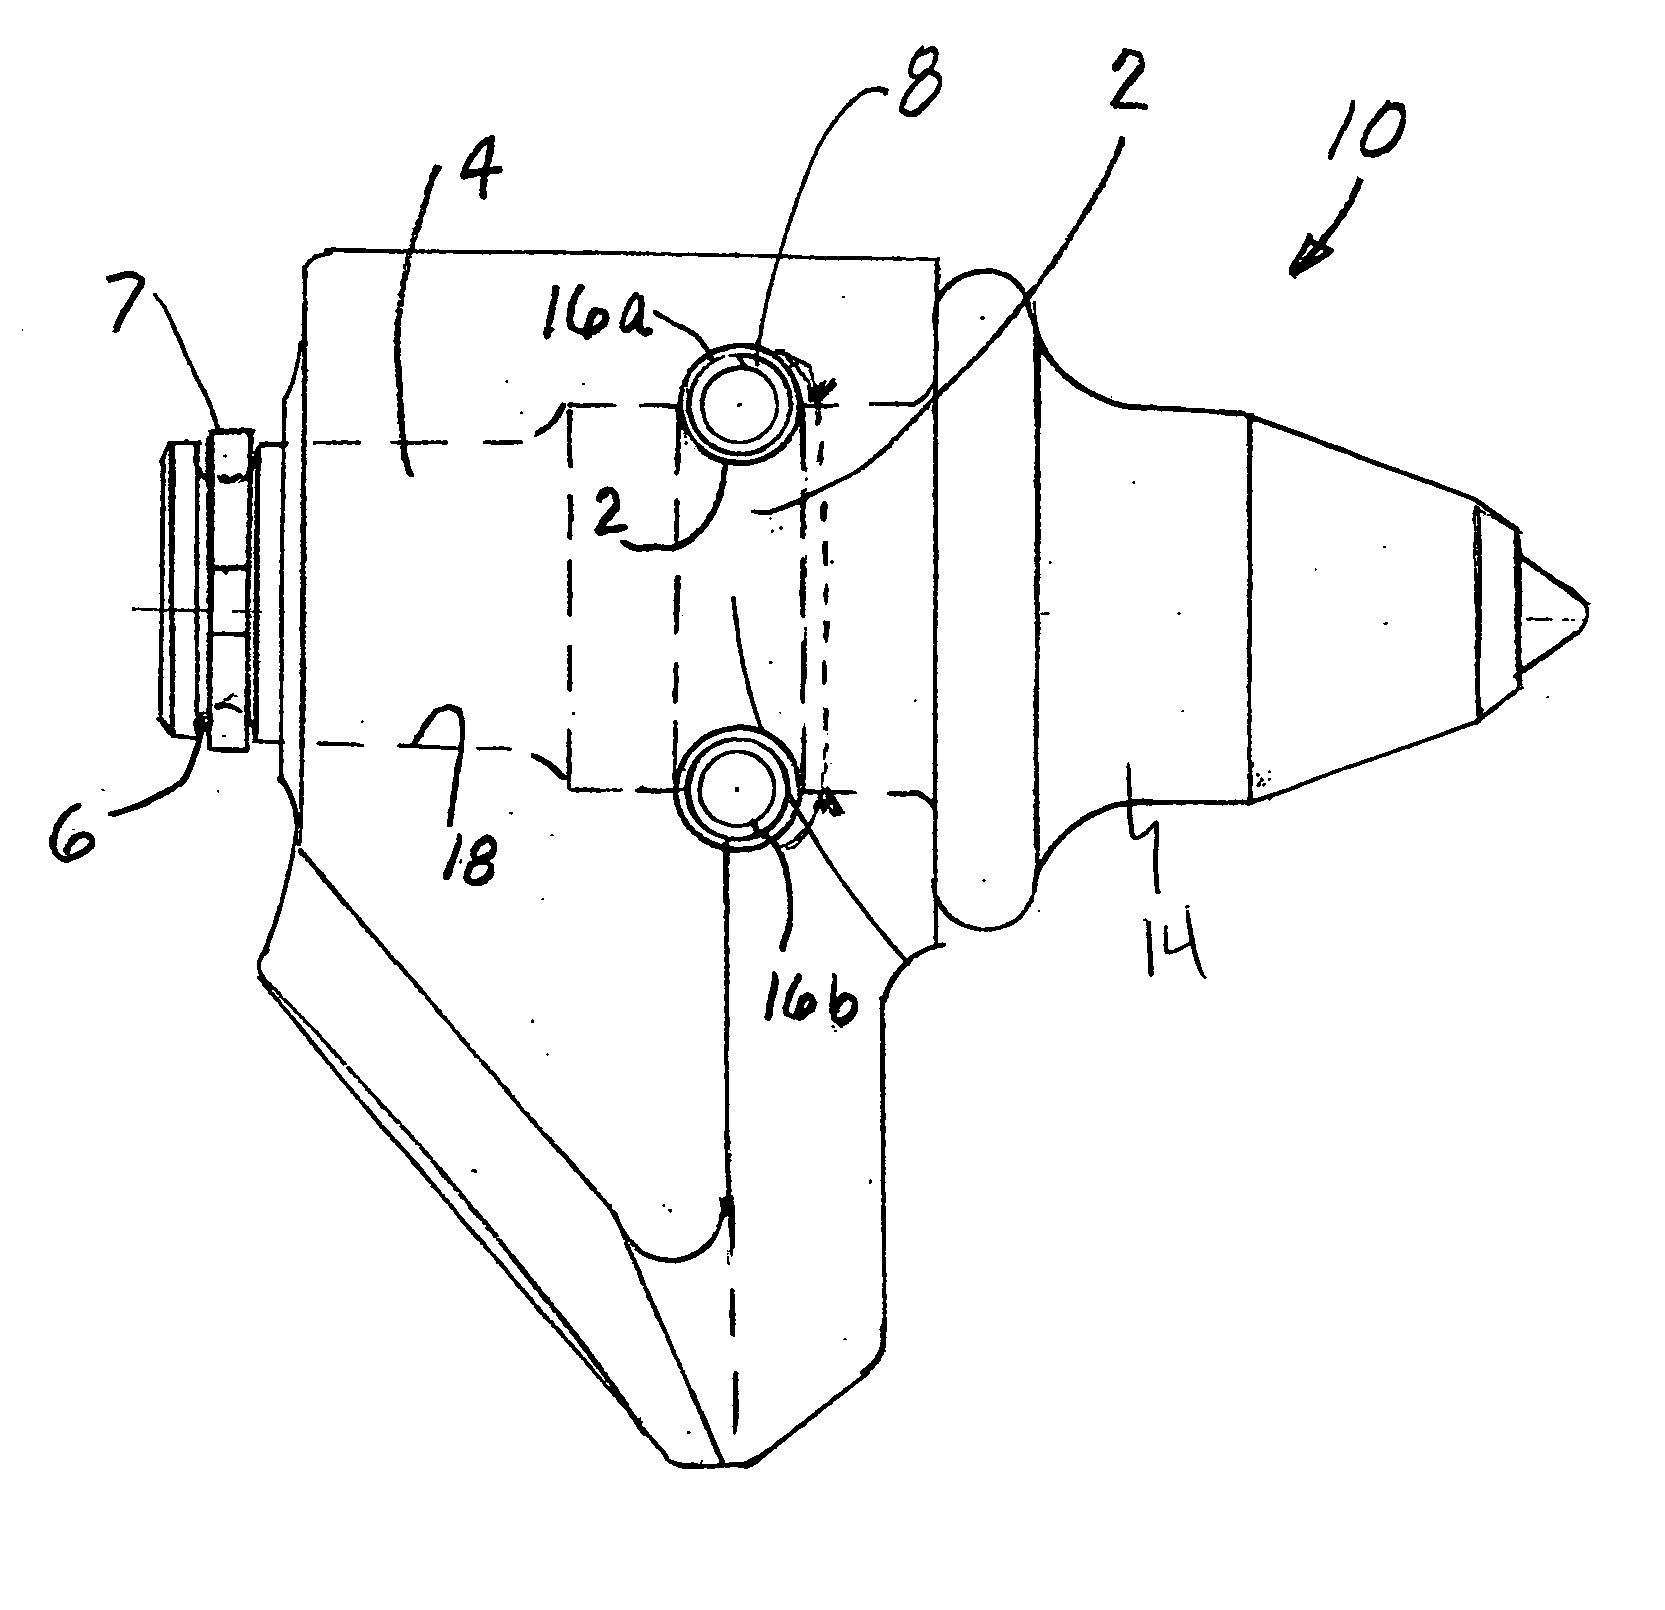 Retaining system for securing a cutting tool to a support block